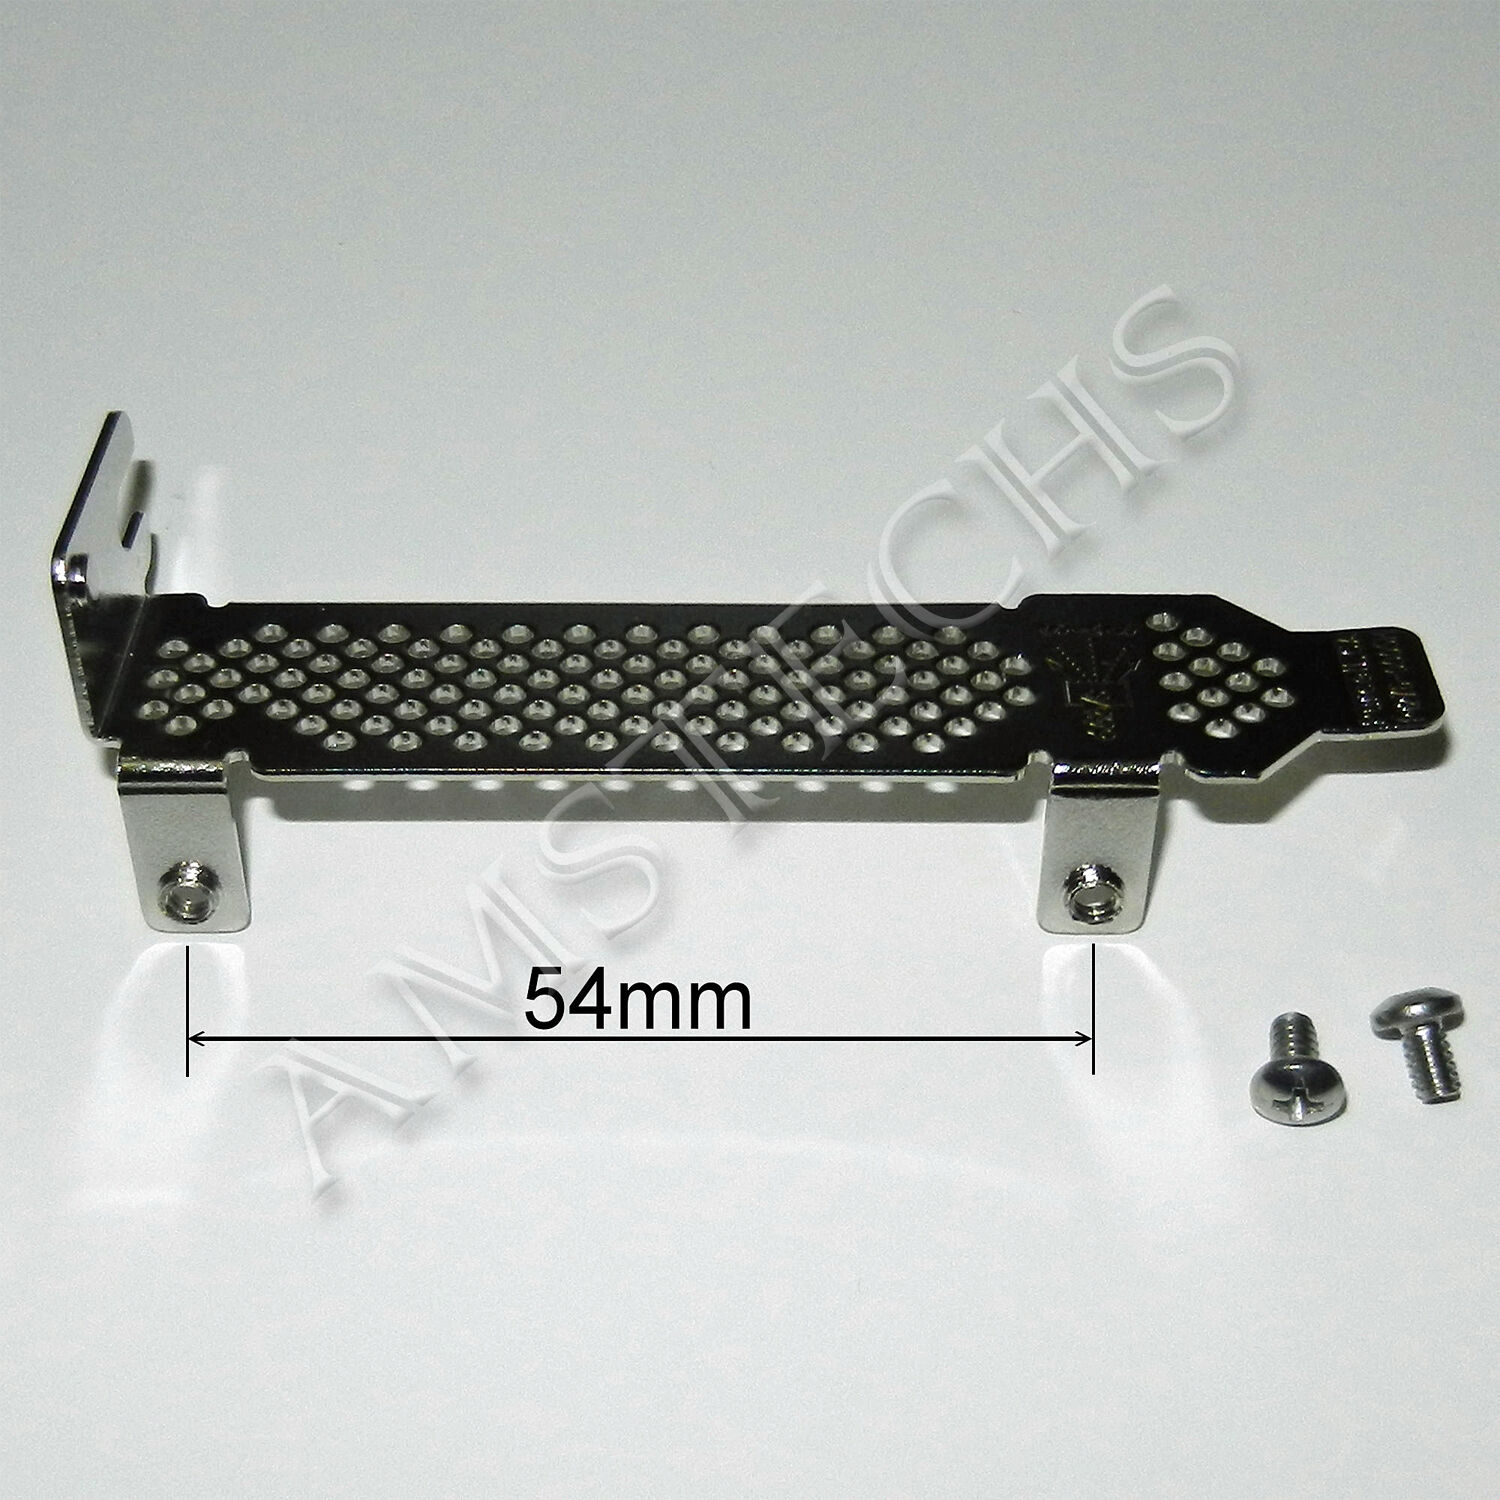 Low Profile Bracket For Adaptec ATTO Dell HP IBM Intel LSI Supermicro Raid Cards